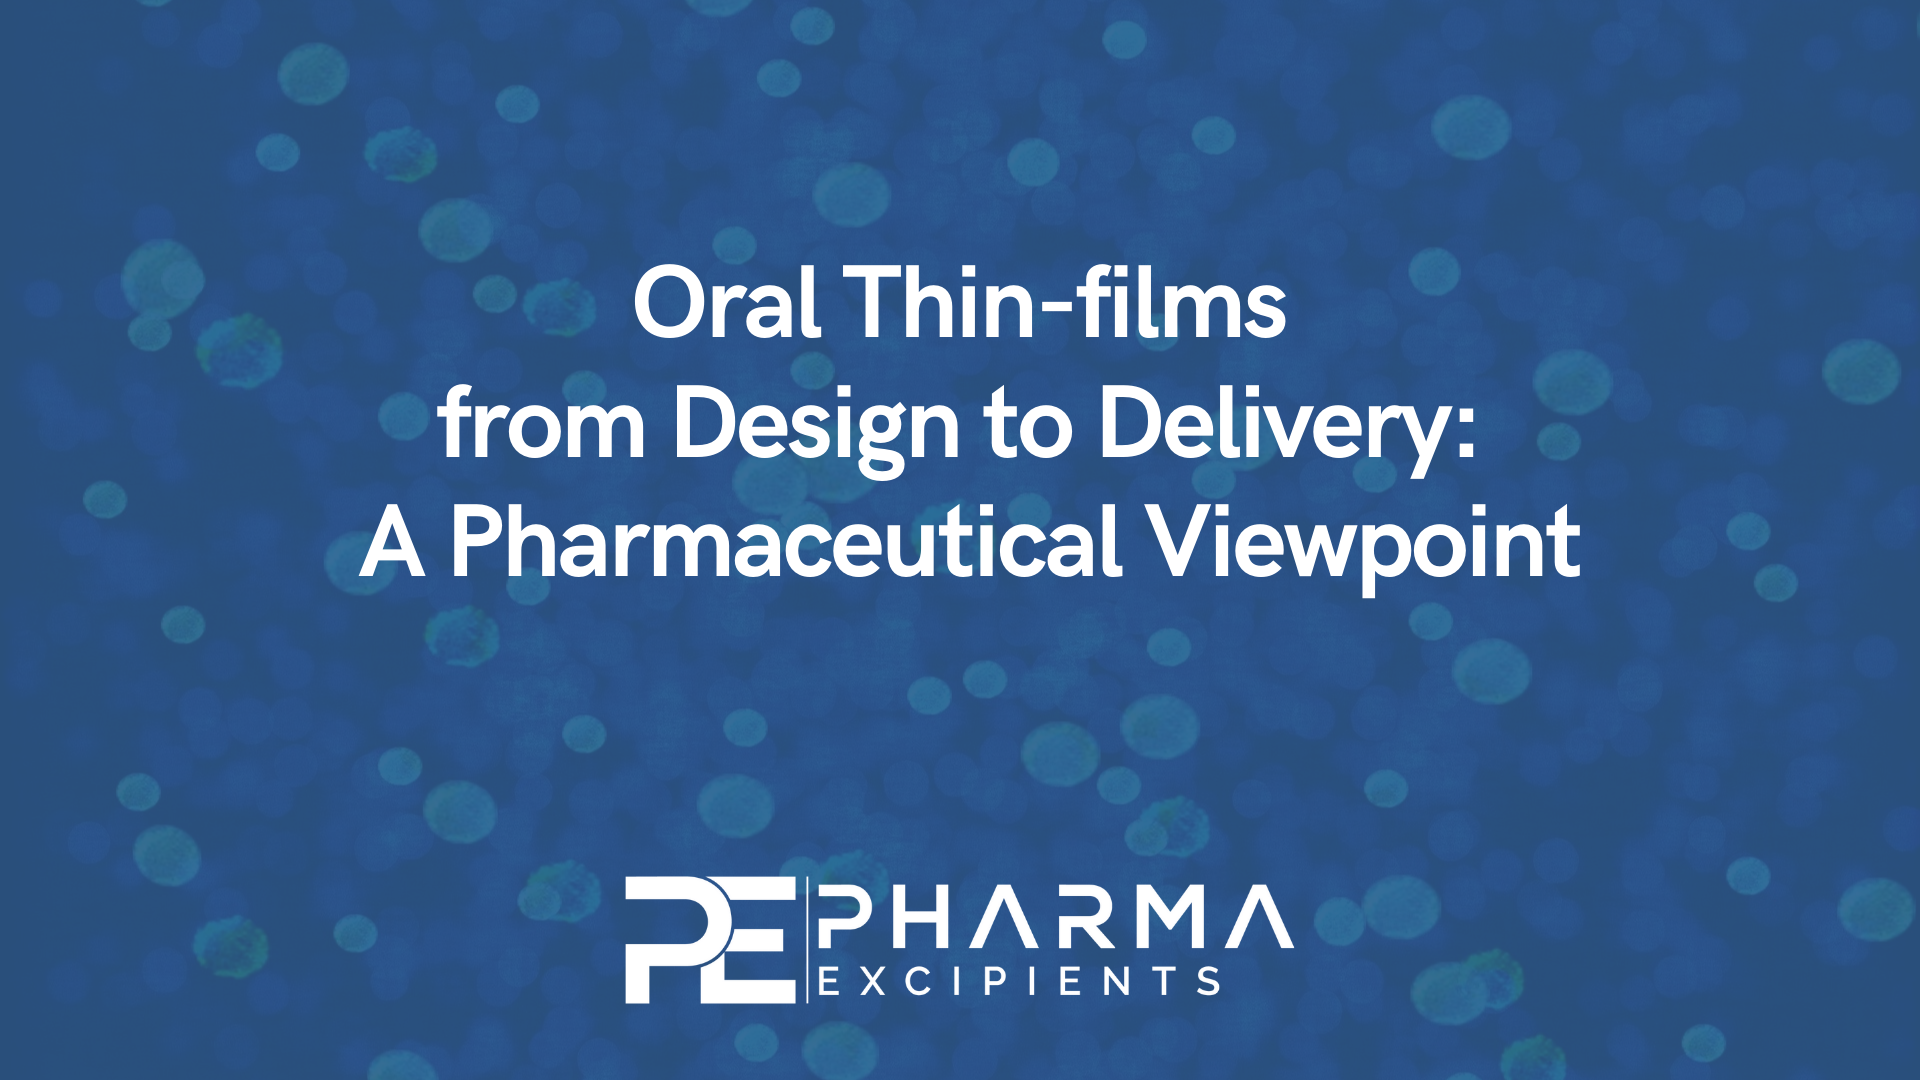 Oral Thin-films from Design to Delivery: A Pharmaceutical Viewpoint